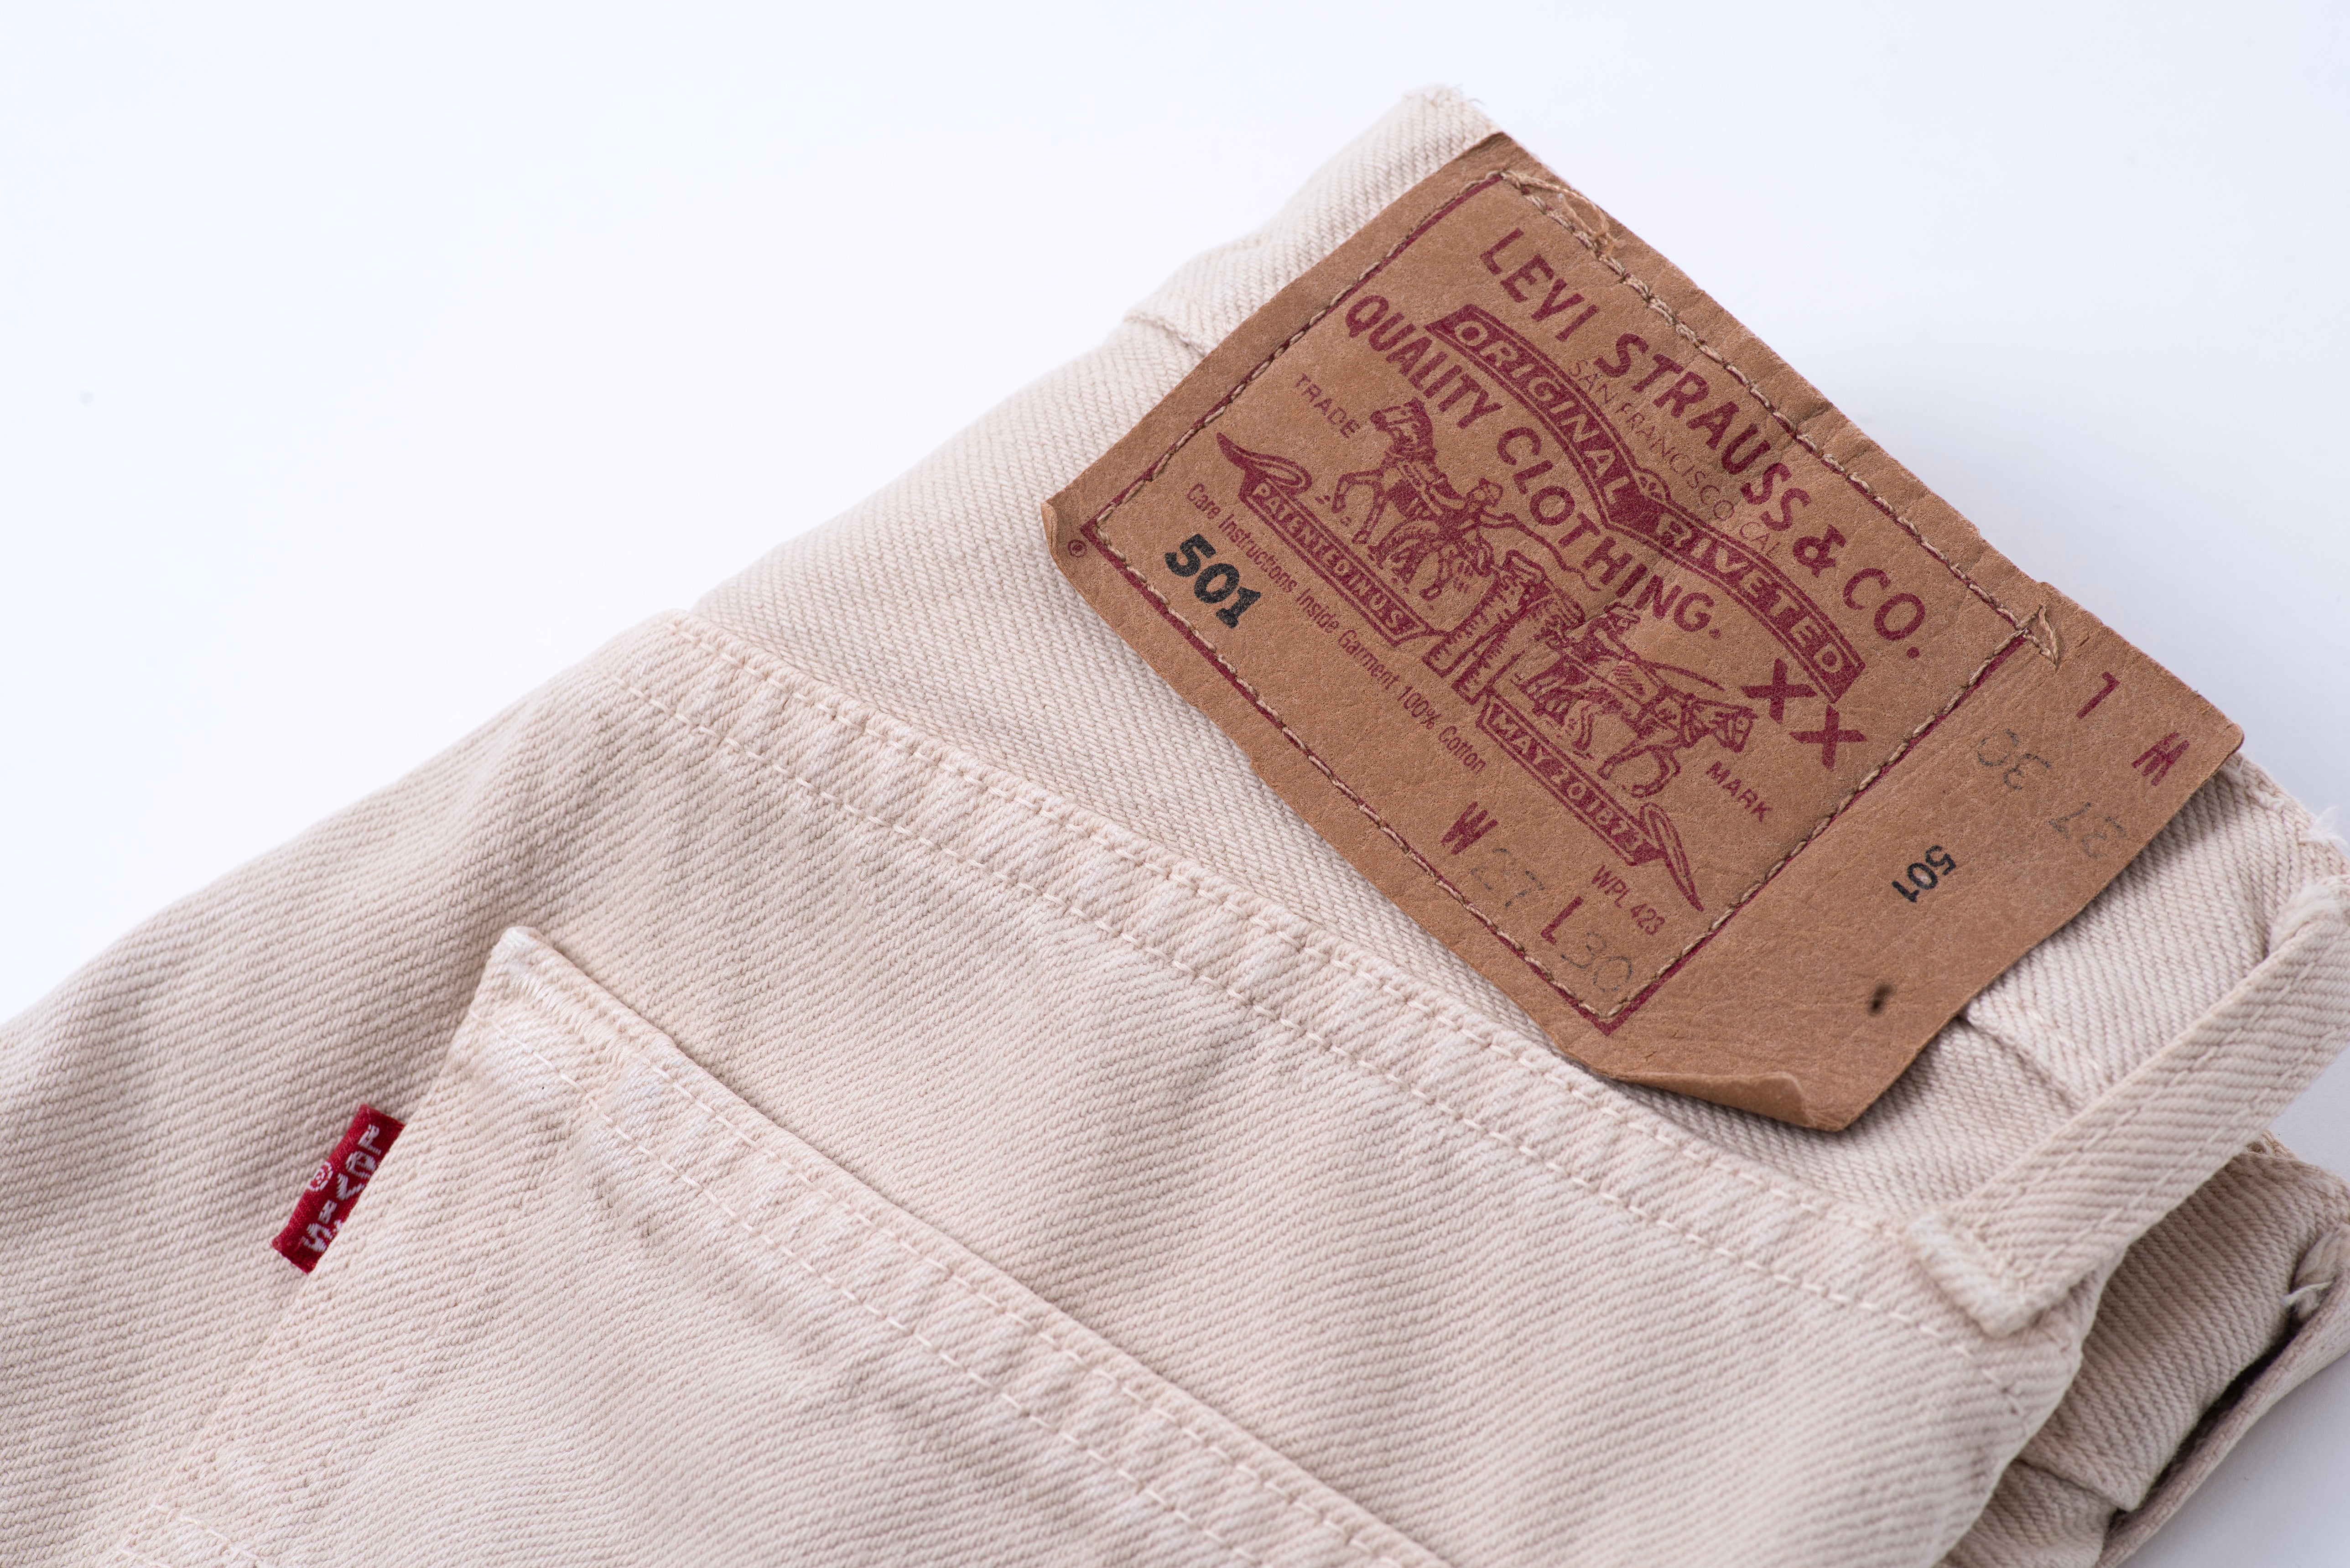 Levi’s 501 Vintage Ivory Women's Jeans Made in UK, W27/L30